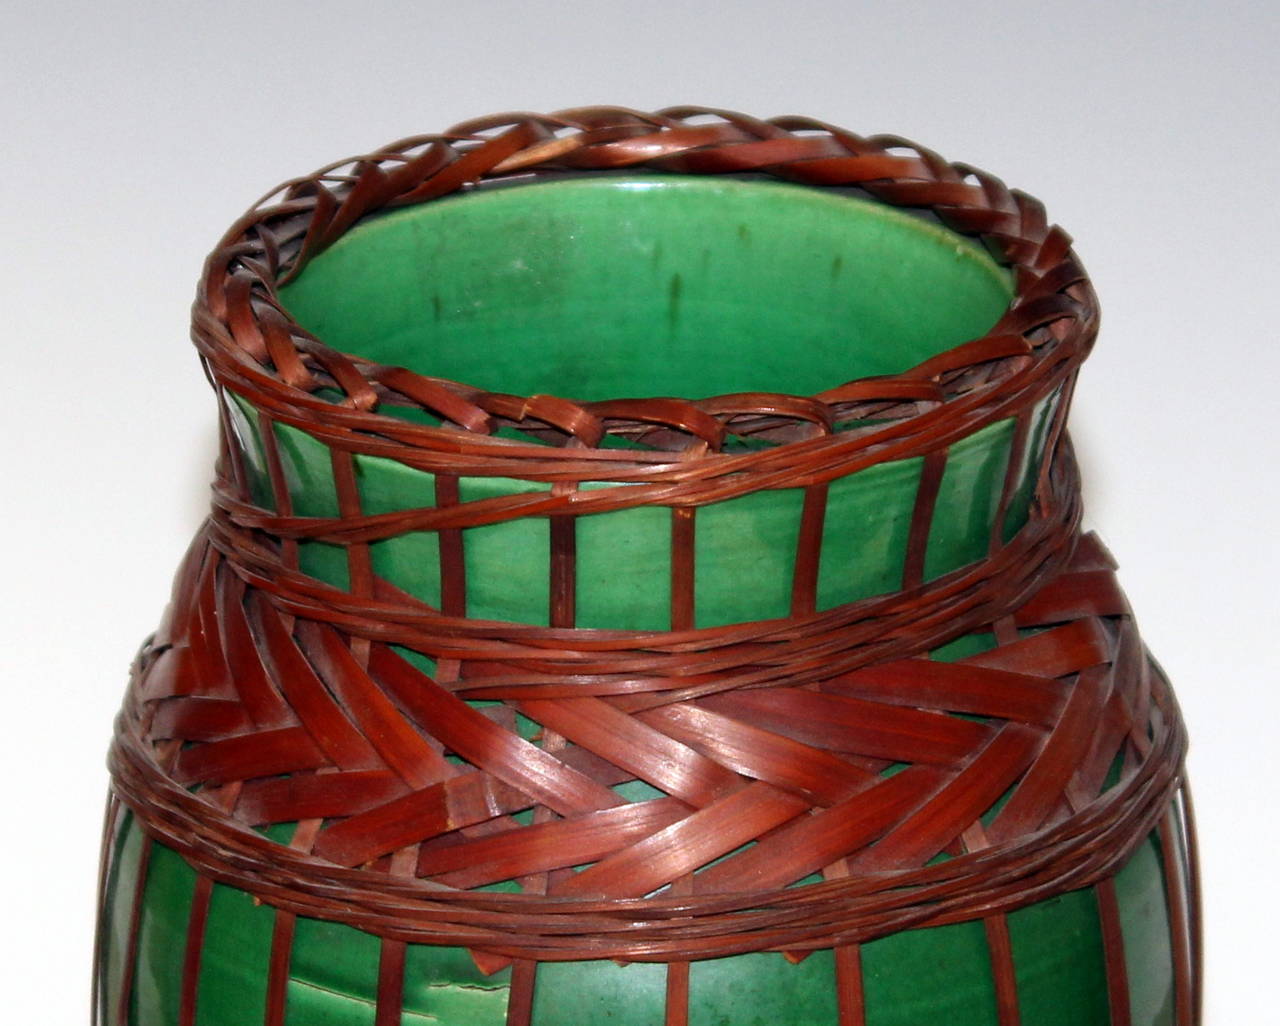 Turned Green Arts & Crafts Awaji Pottery Vases with Bamboo Weaving